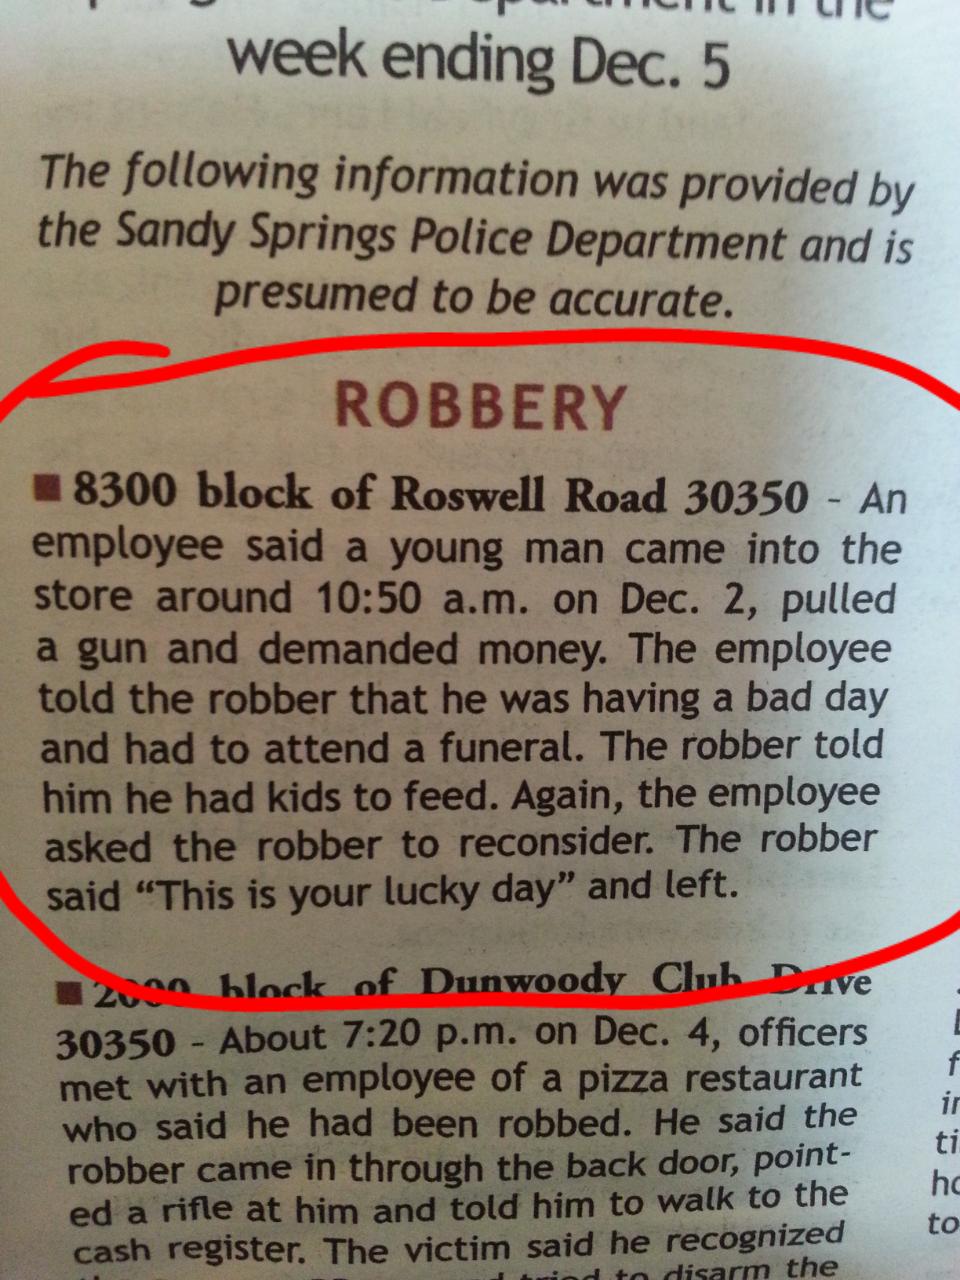 funny shitty day meme - Til I Liic week ending Dec. 5 The ing information was provided by the Sandy Springs Police Department and is presumed to be accurate. Robbery 18300 block of Roswell Road 30350 An employee said a young man came into the store around